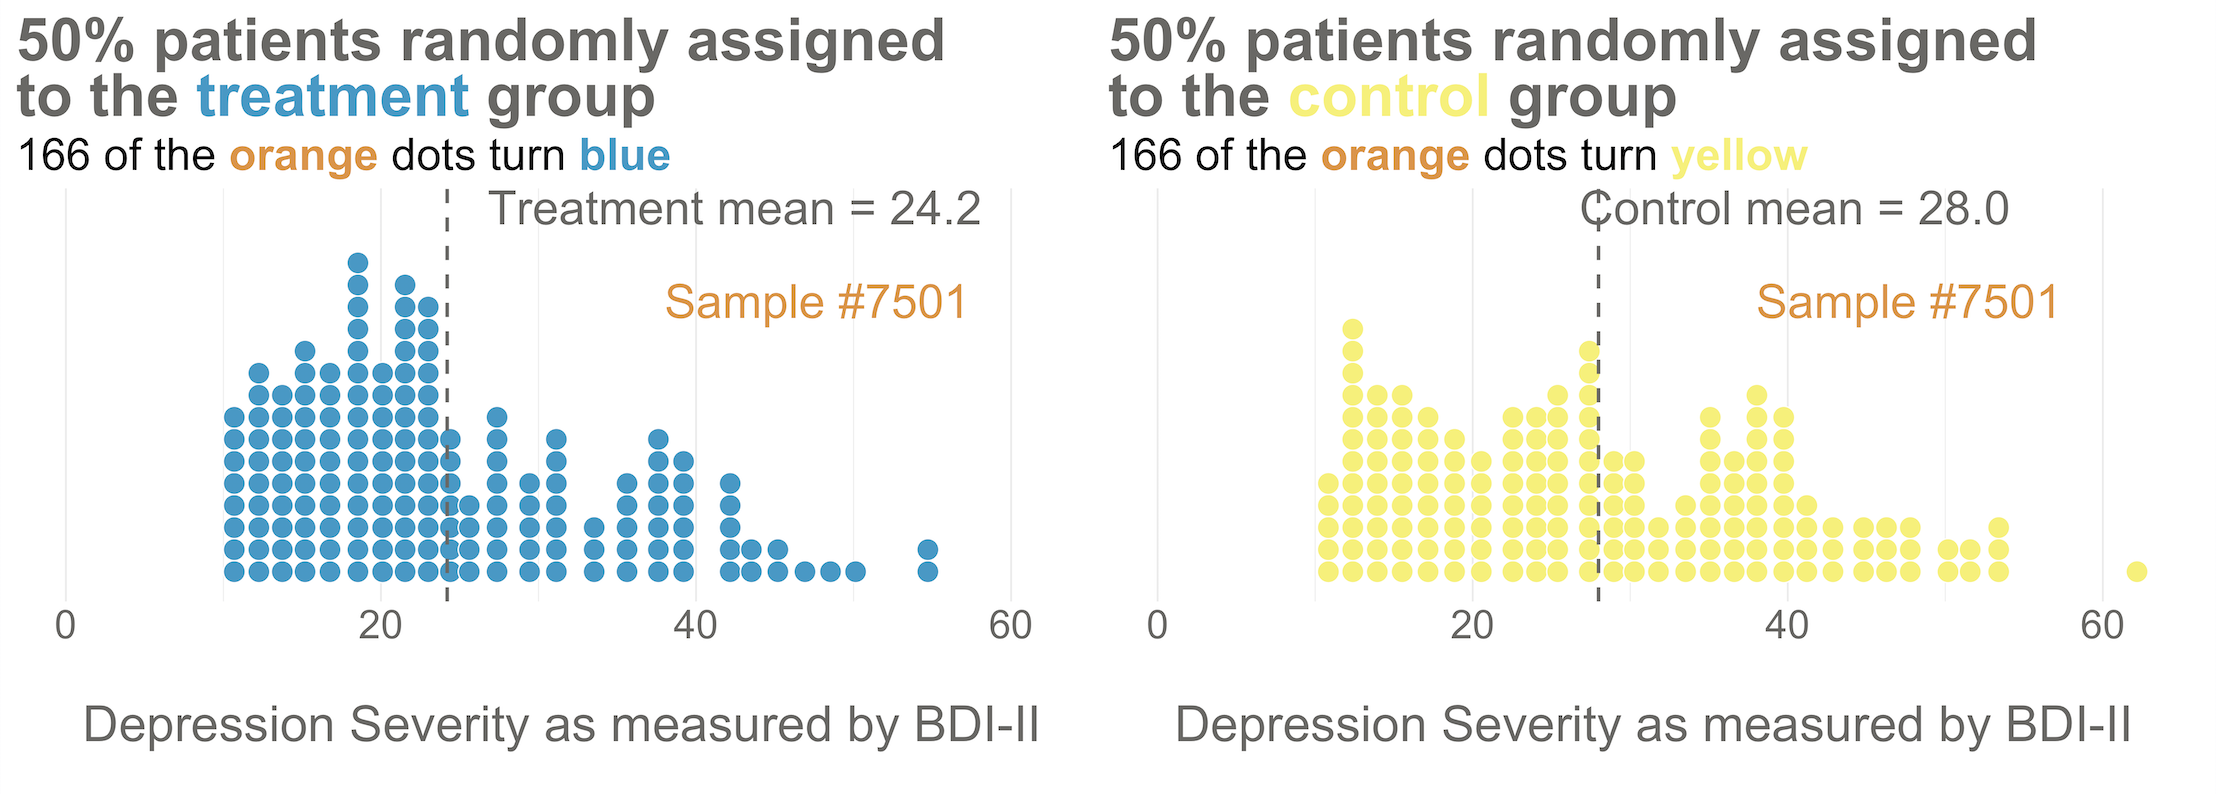 Distribution of baseline BDI-II scores by study arm. Even with random assignment the group means are not 100% identical at baseline. This is normal. As the sample size gets bigger, randomization produces better balance.